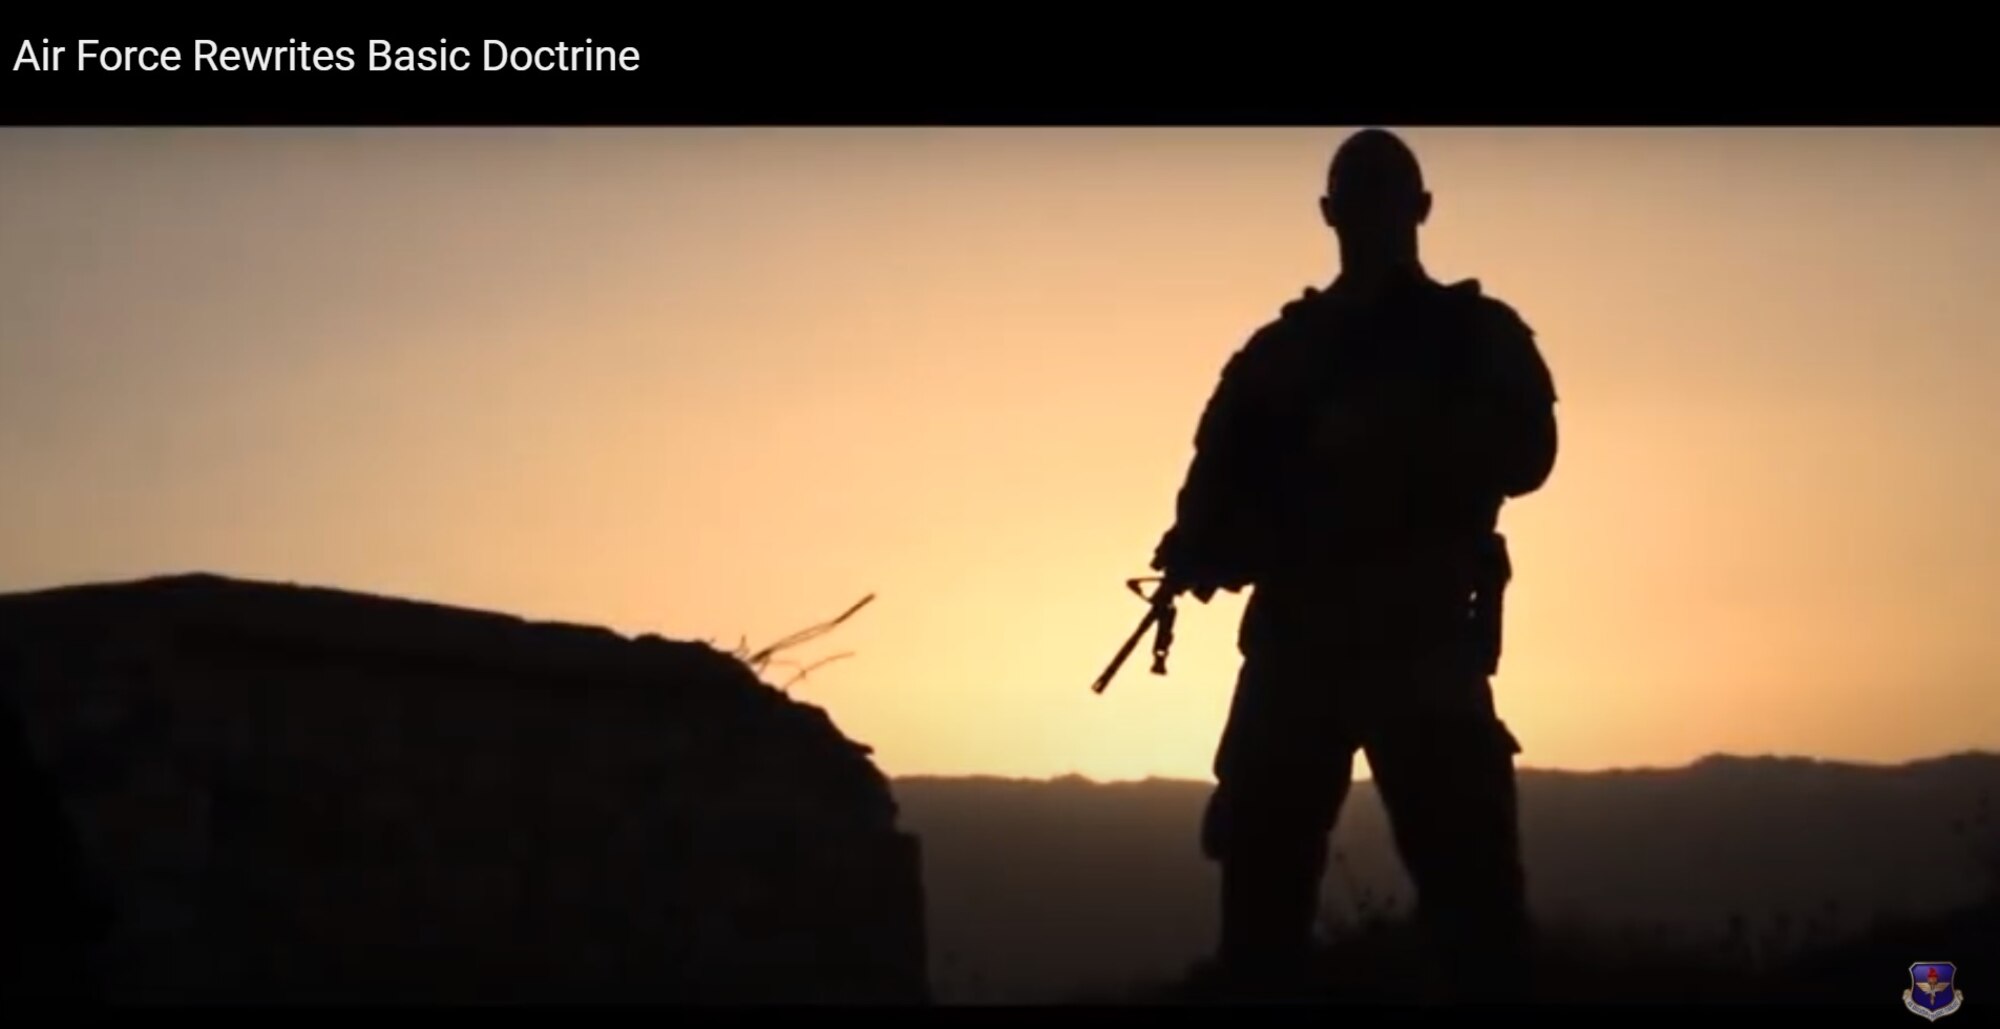 A military member is silhouetted against the sunset